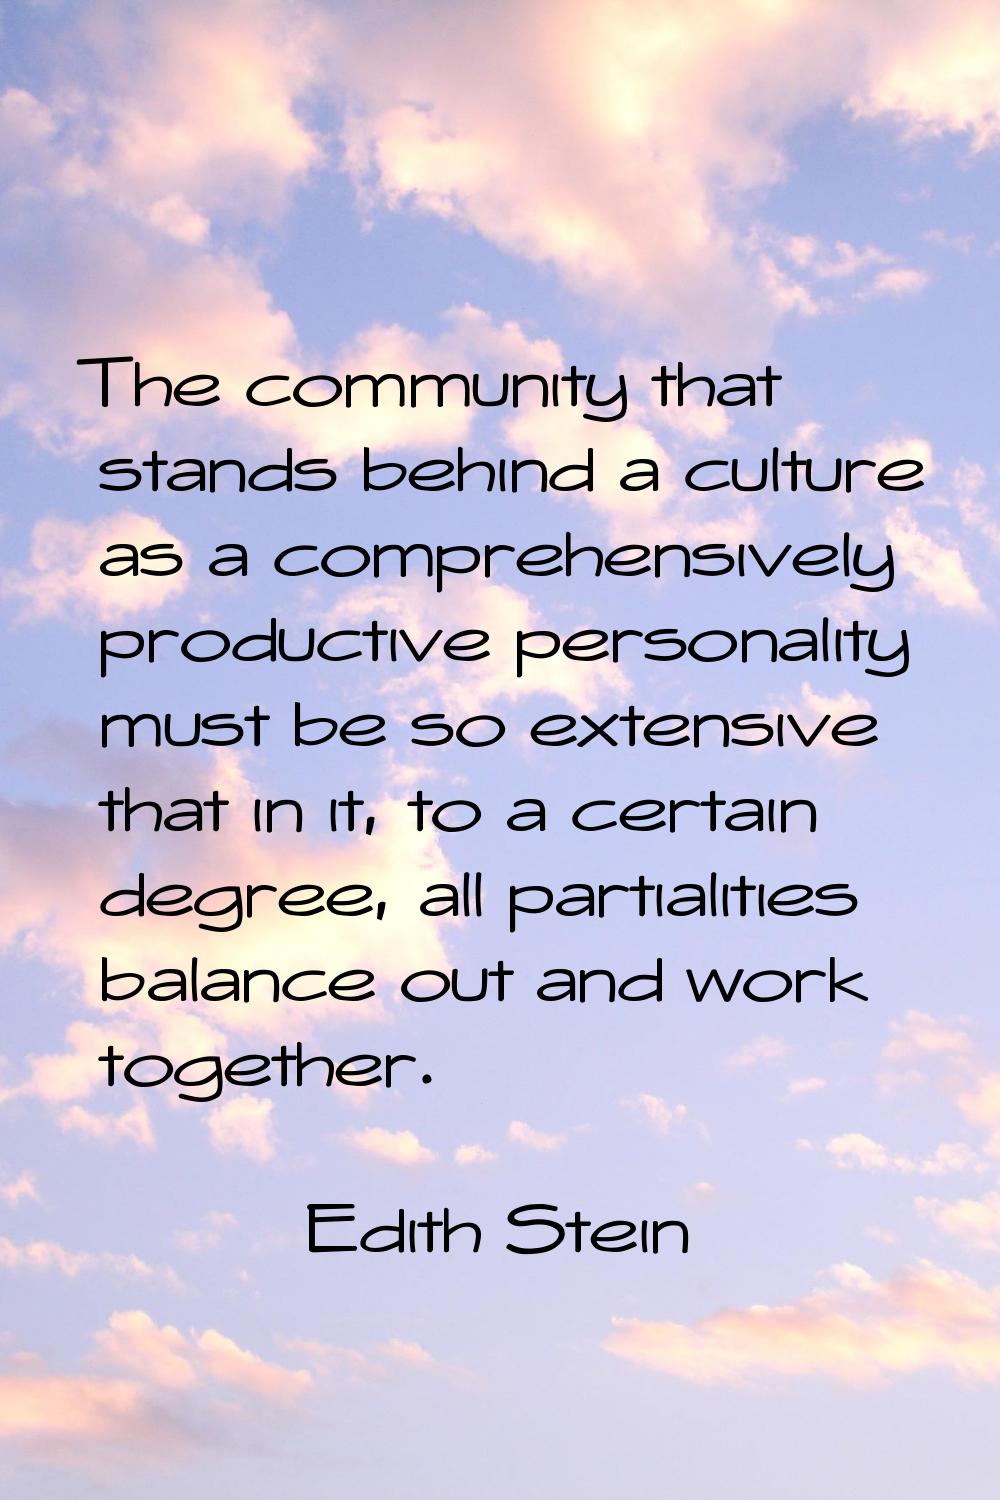 The community that stands behind a culture as a comprehensively productive personality must be so e